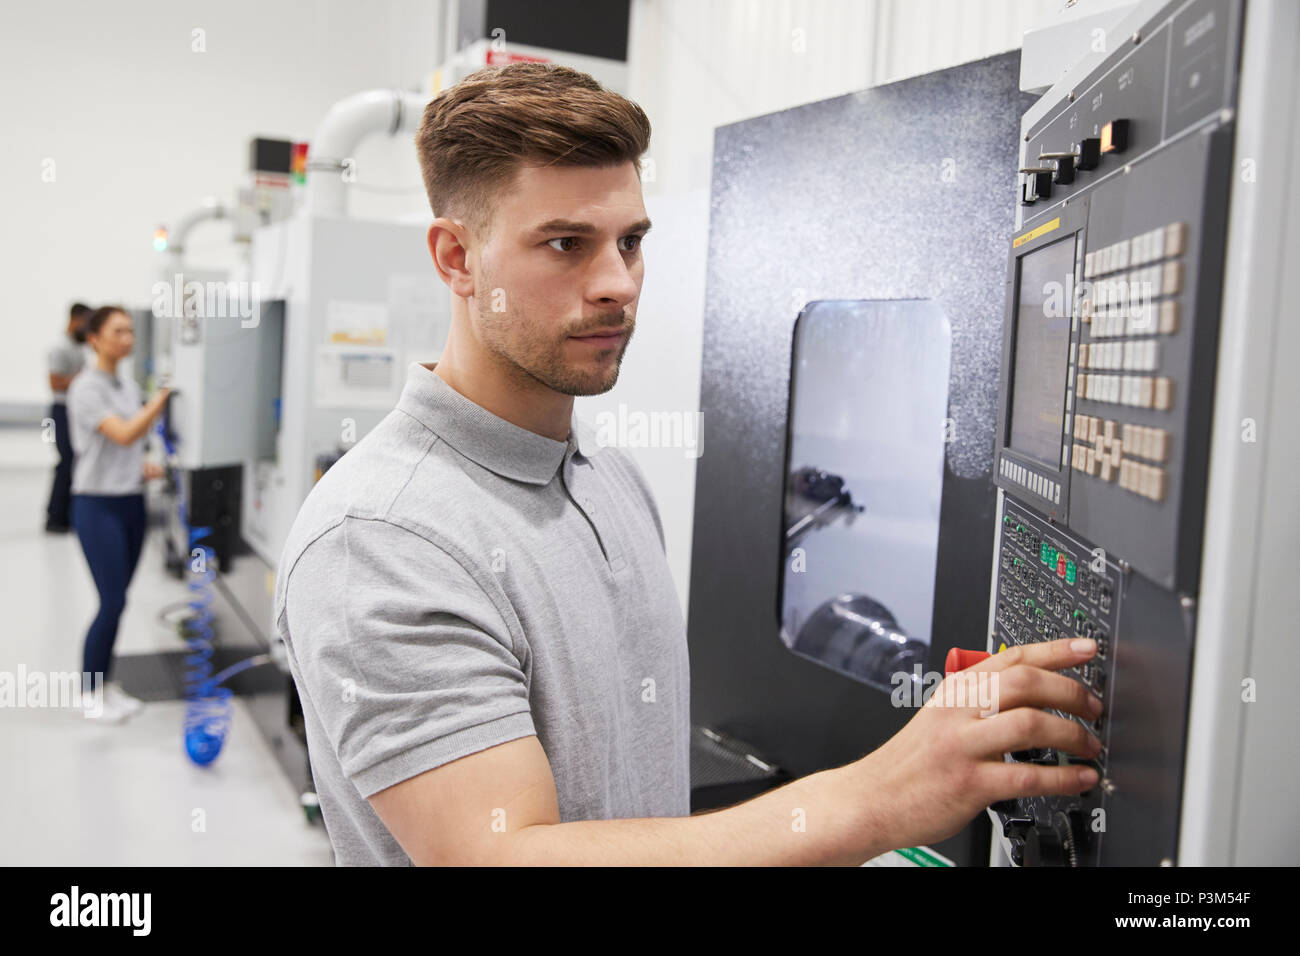 Male Engineer Operating CNC Machinery In Factory Stock Photo